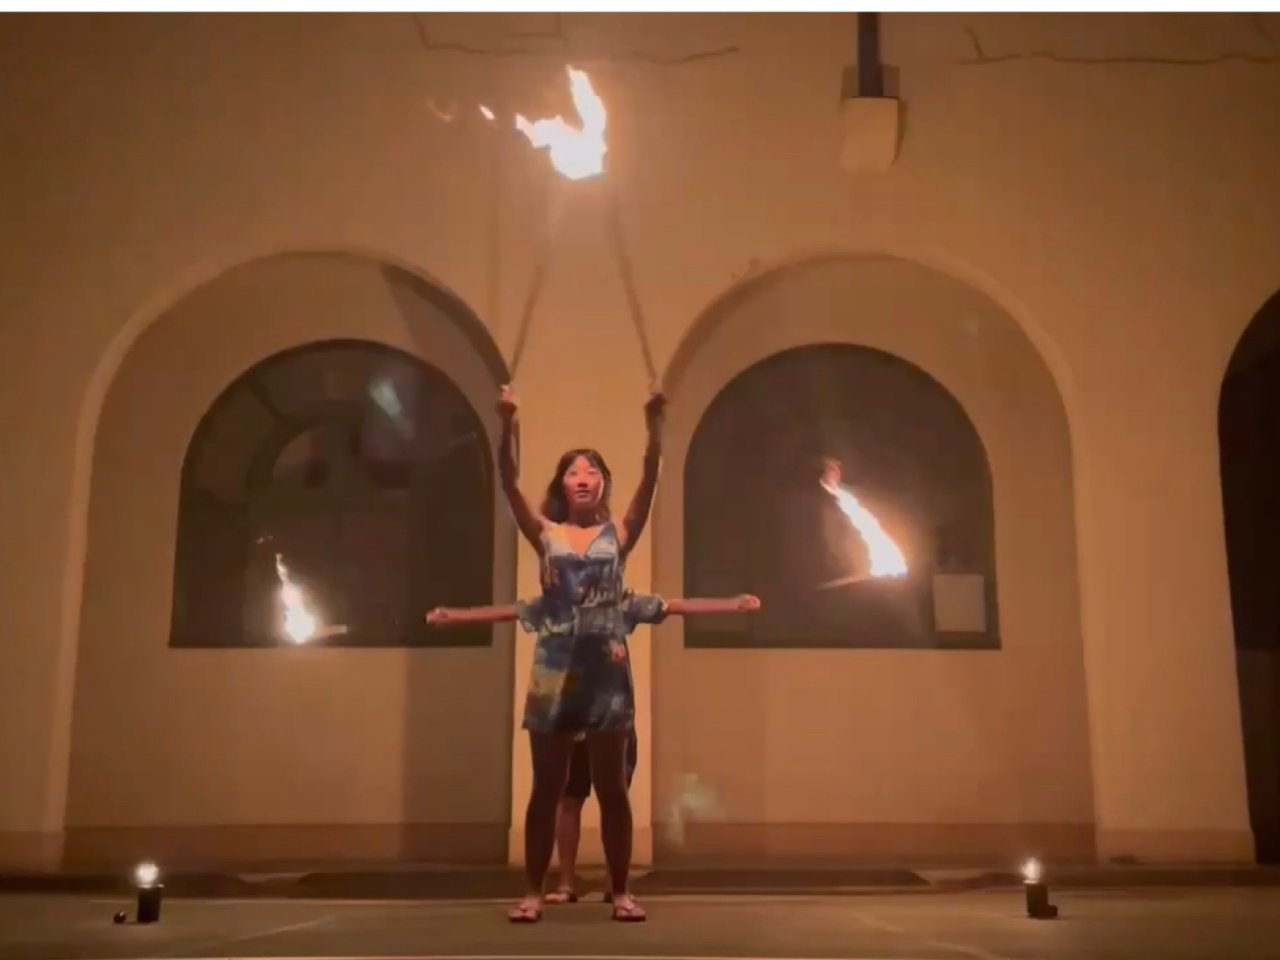 Fire Dance,Vacation Rentals, Homes, Experiences & Places - Airbnb